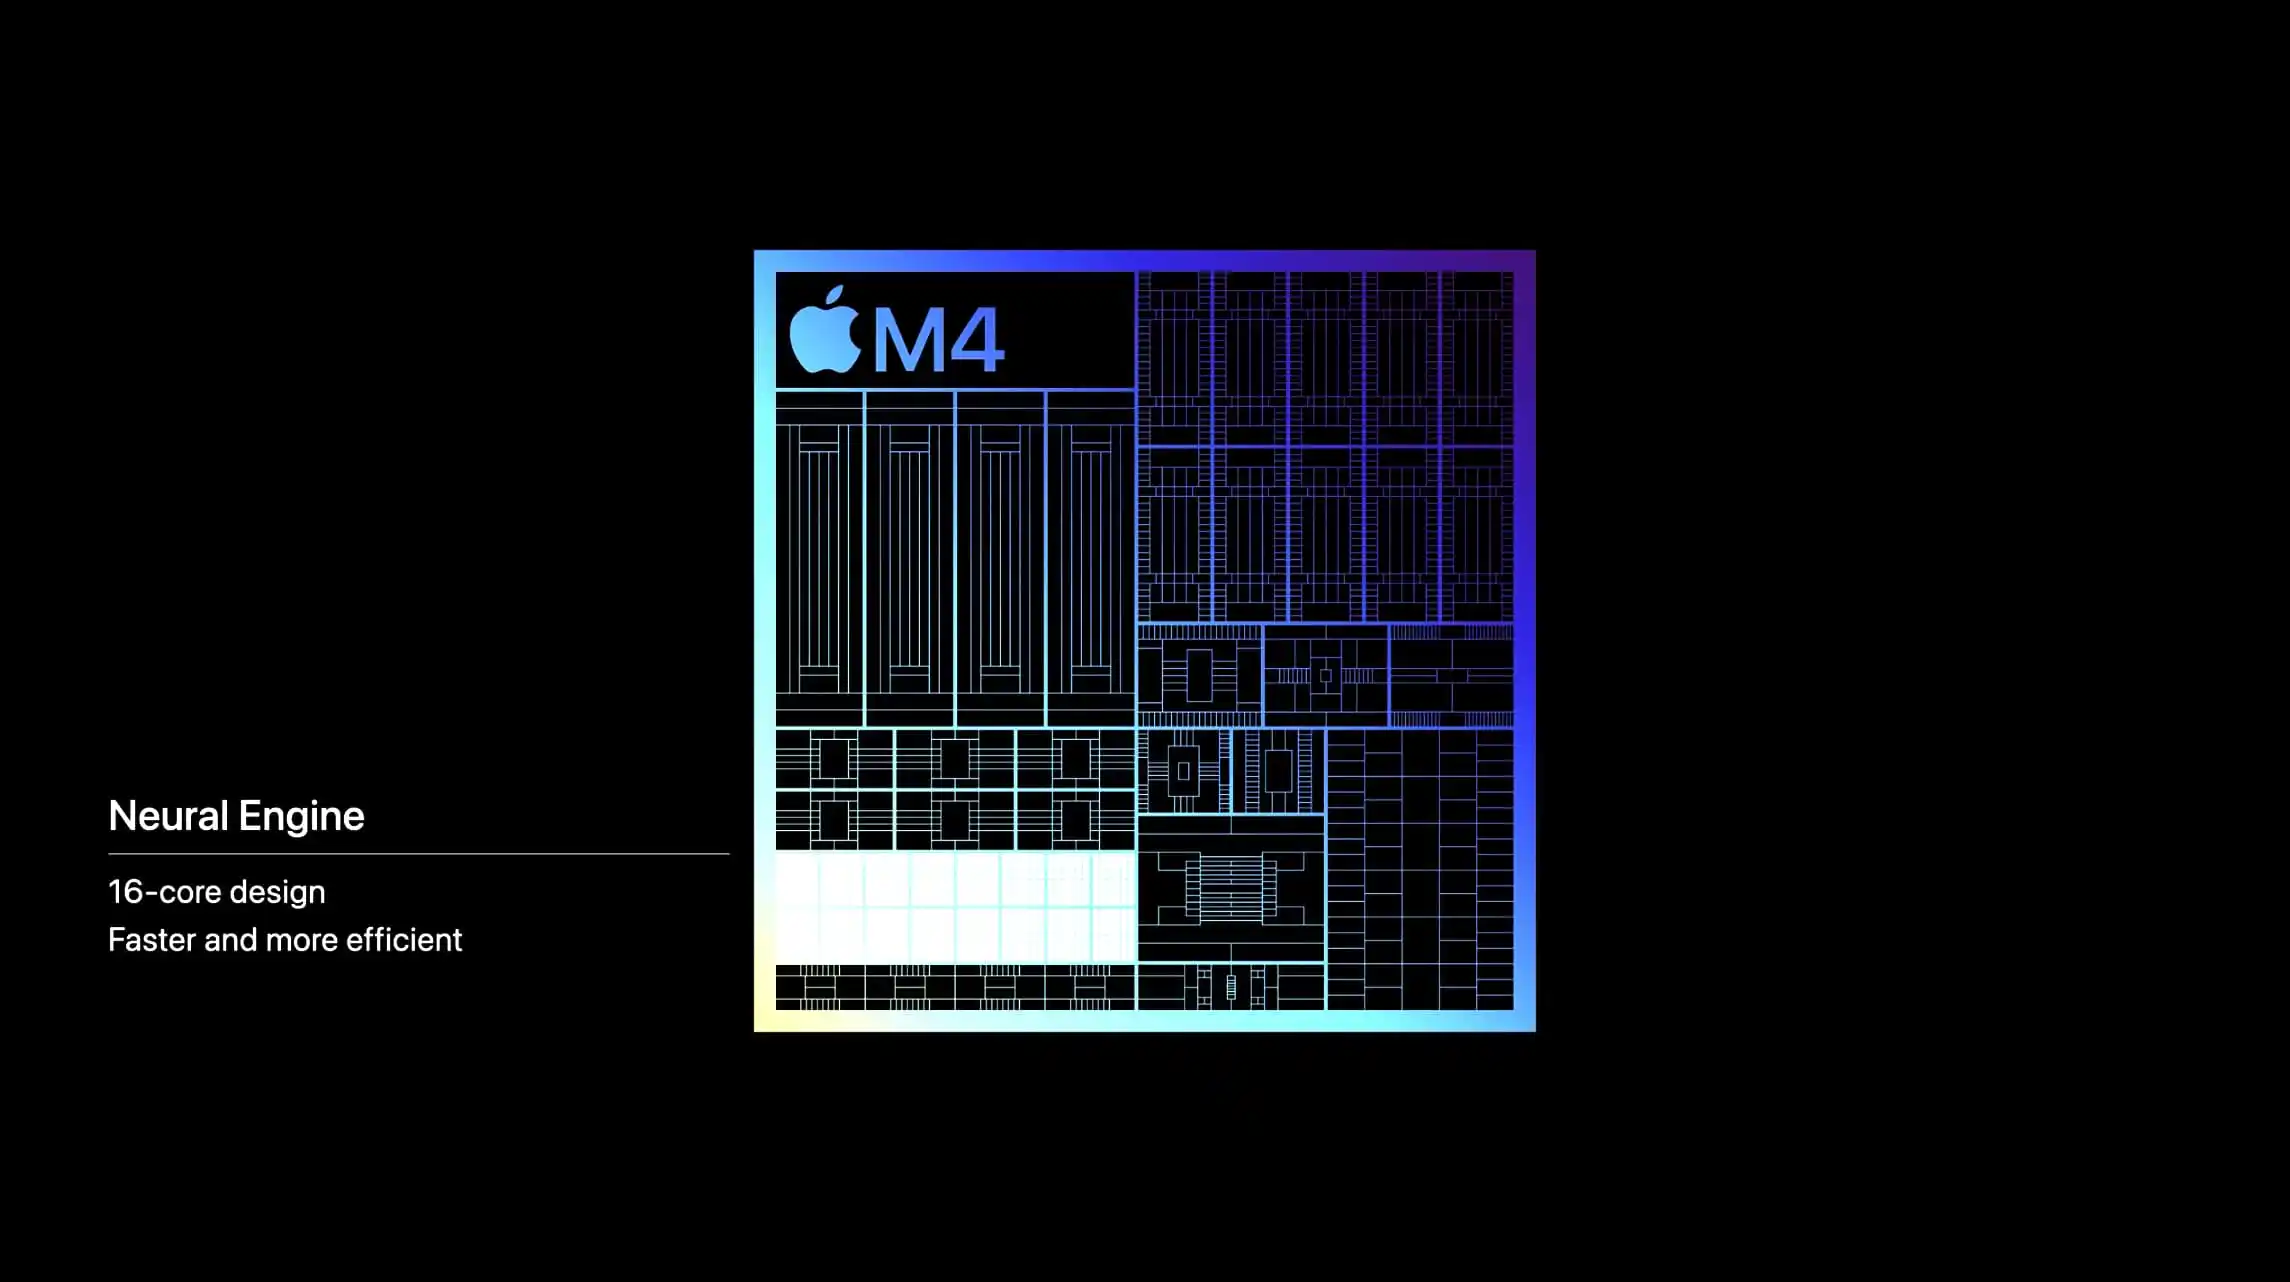 Buying An M4 iPad Pro? You Should Know About These Two Unadvertised Tiers of RAM, CPU, and More